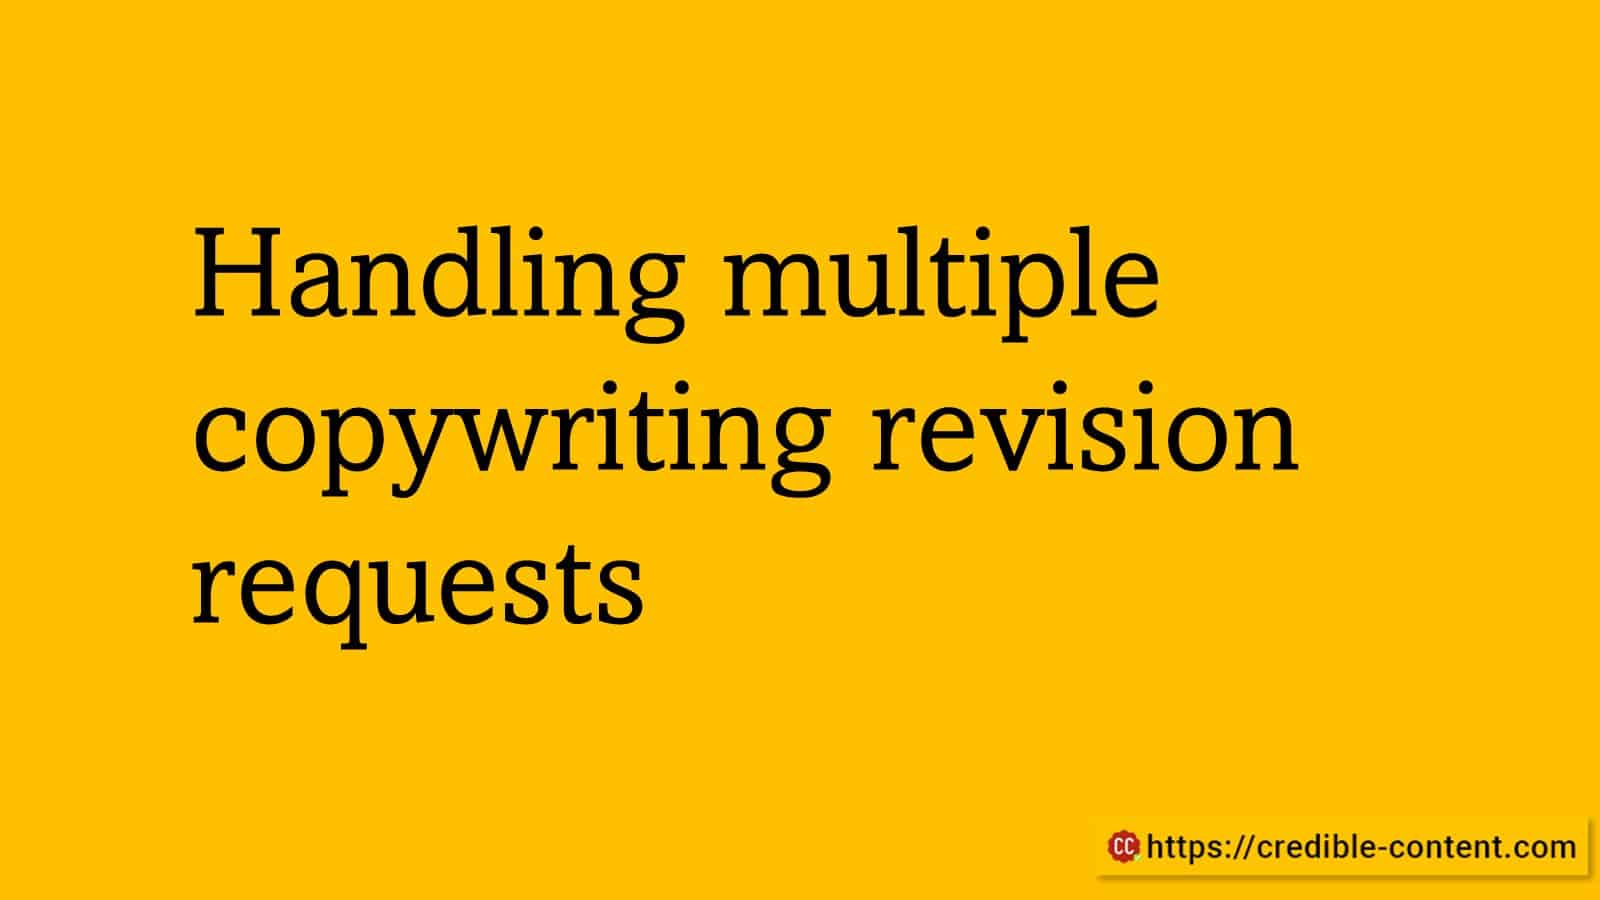 Handling multiple copywriting revision requests